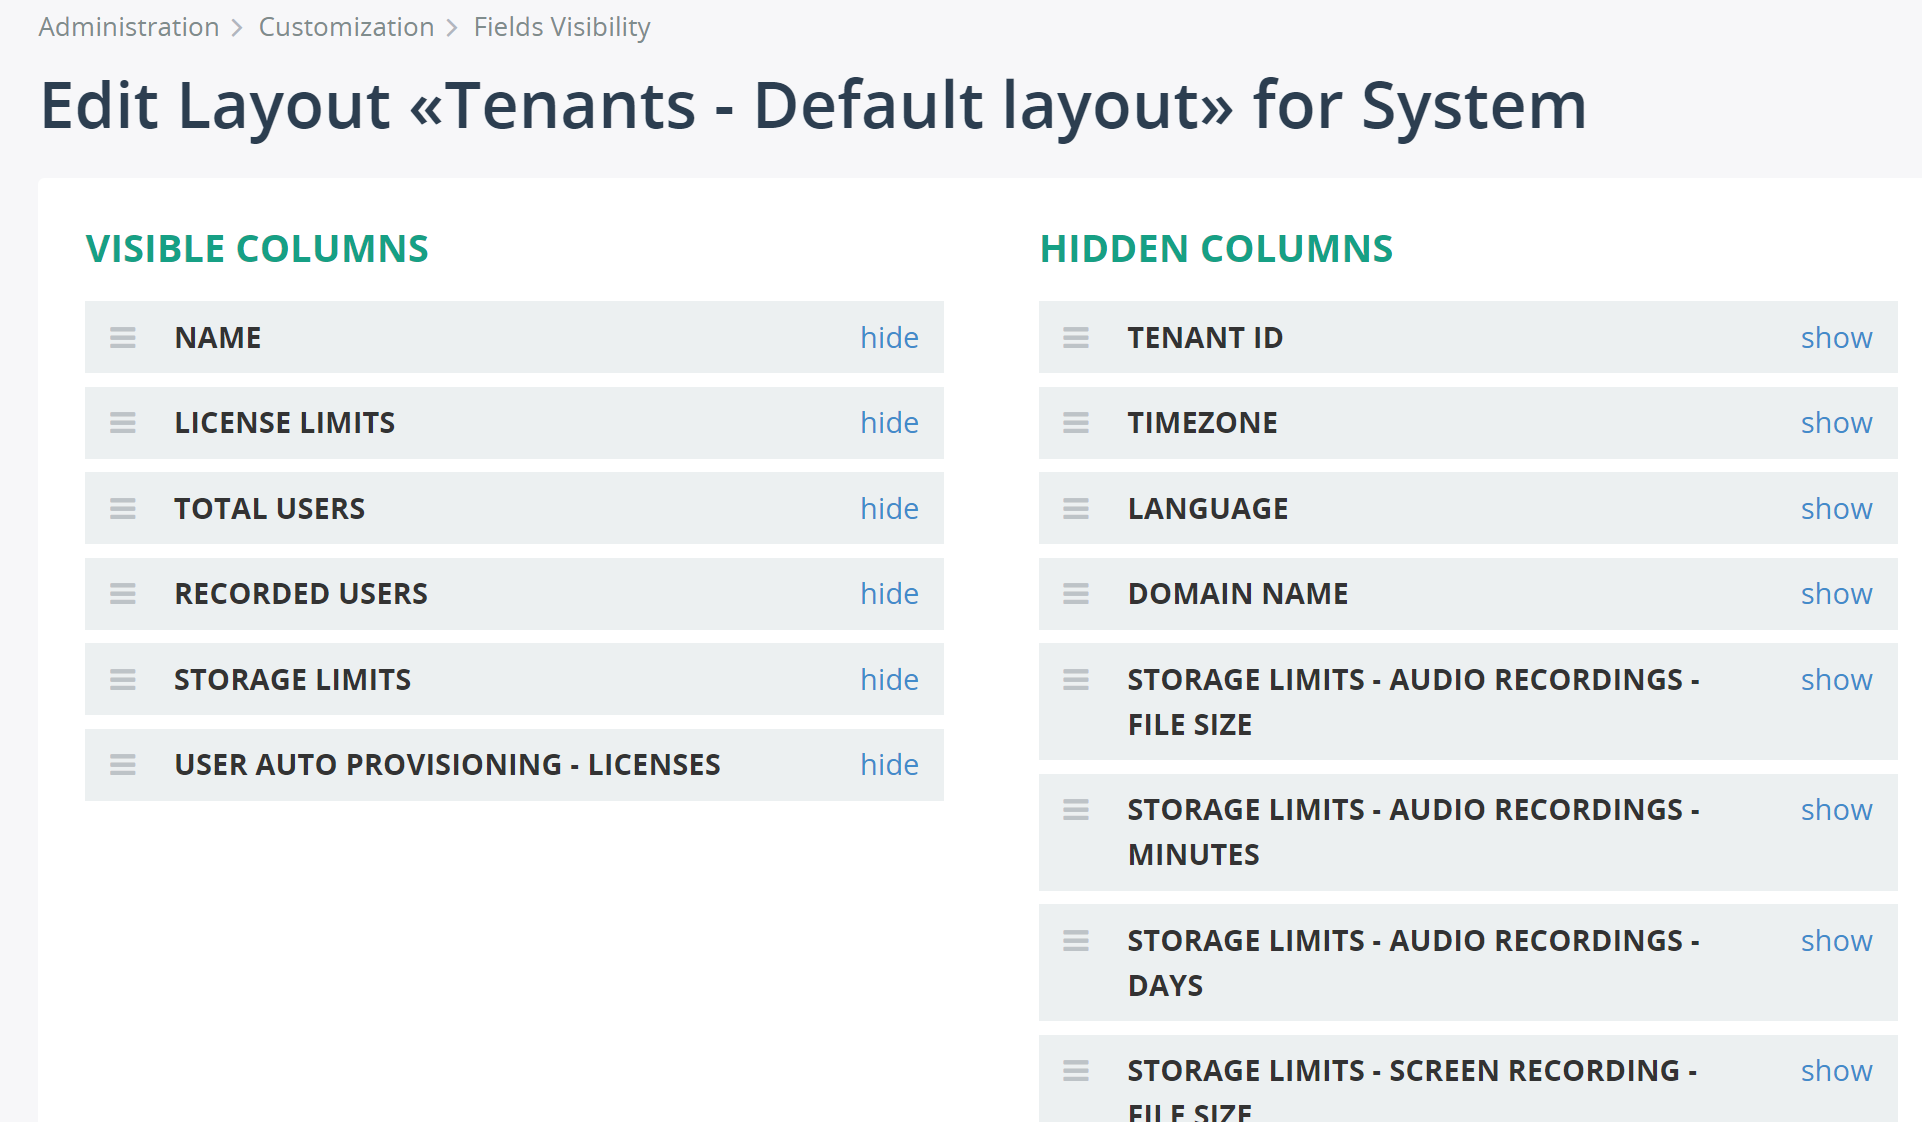 Extend Field Visibility configuration for Tenants page with more attributes